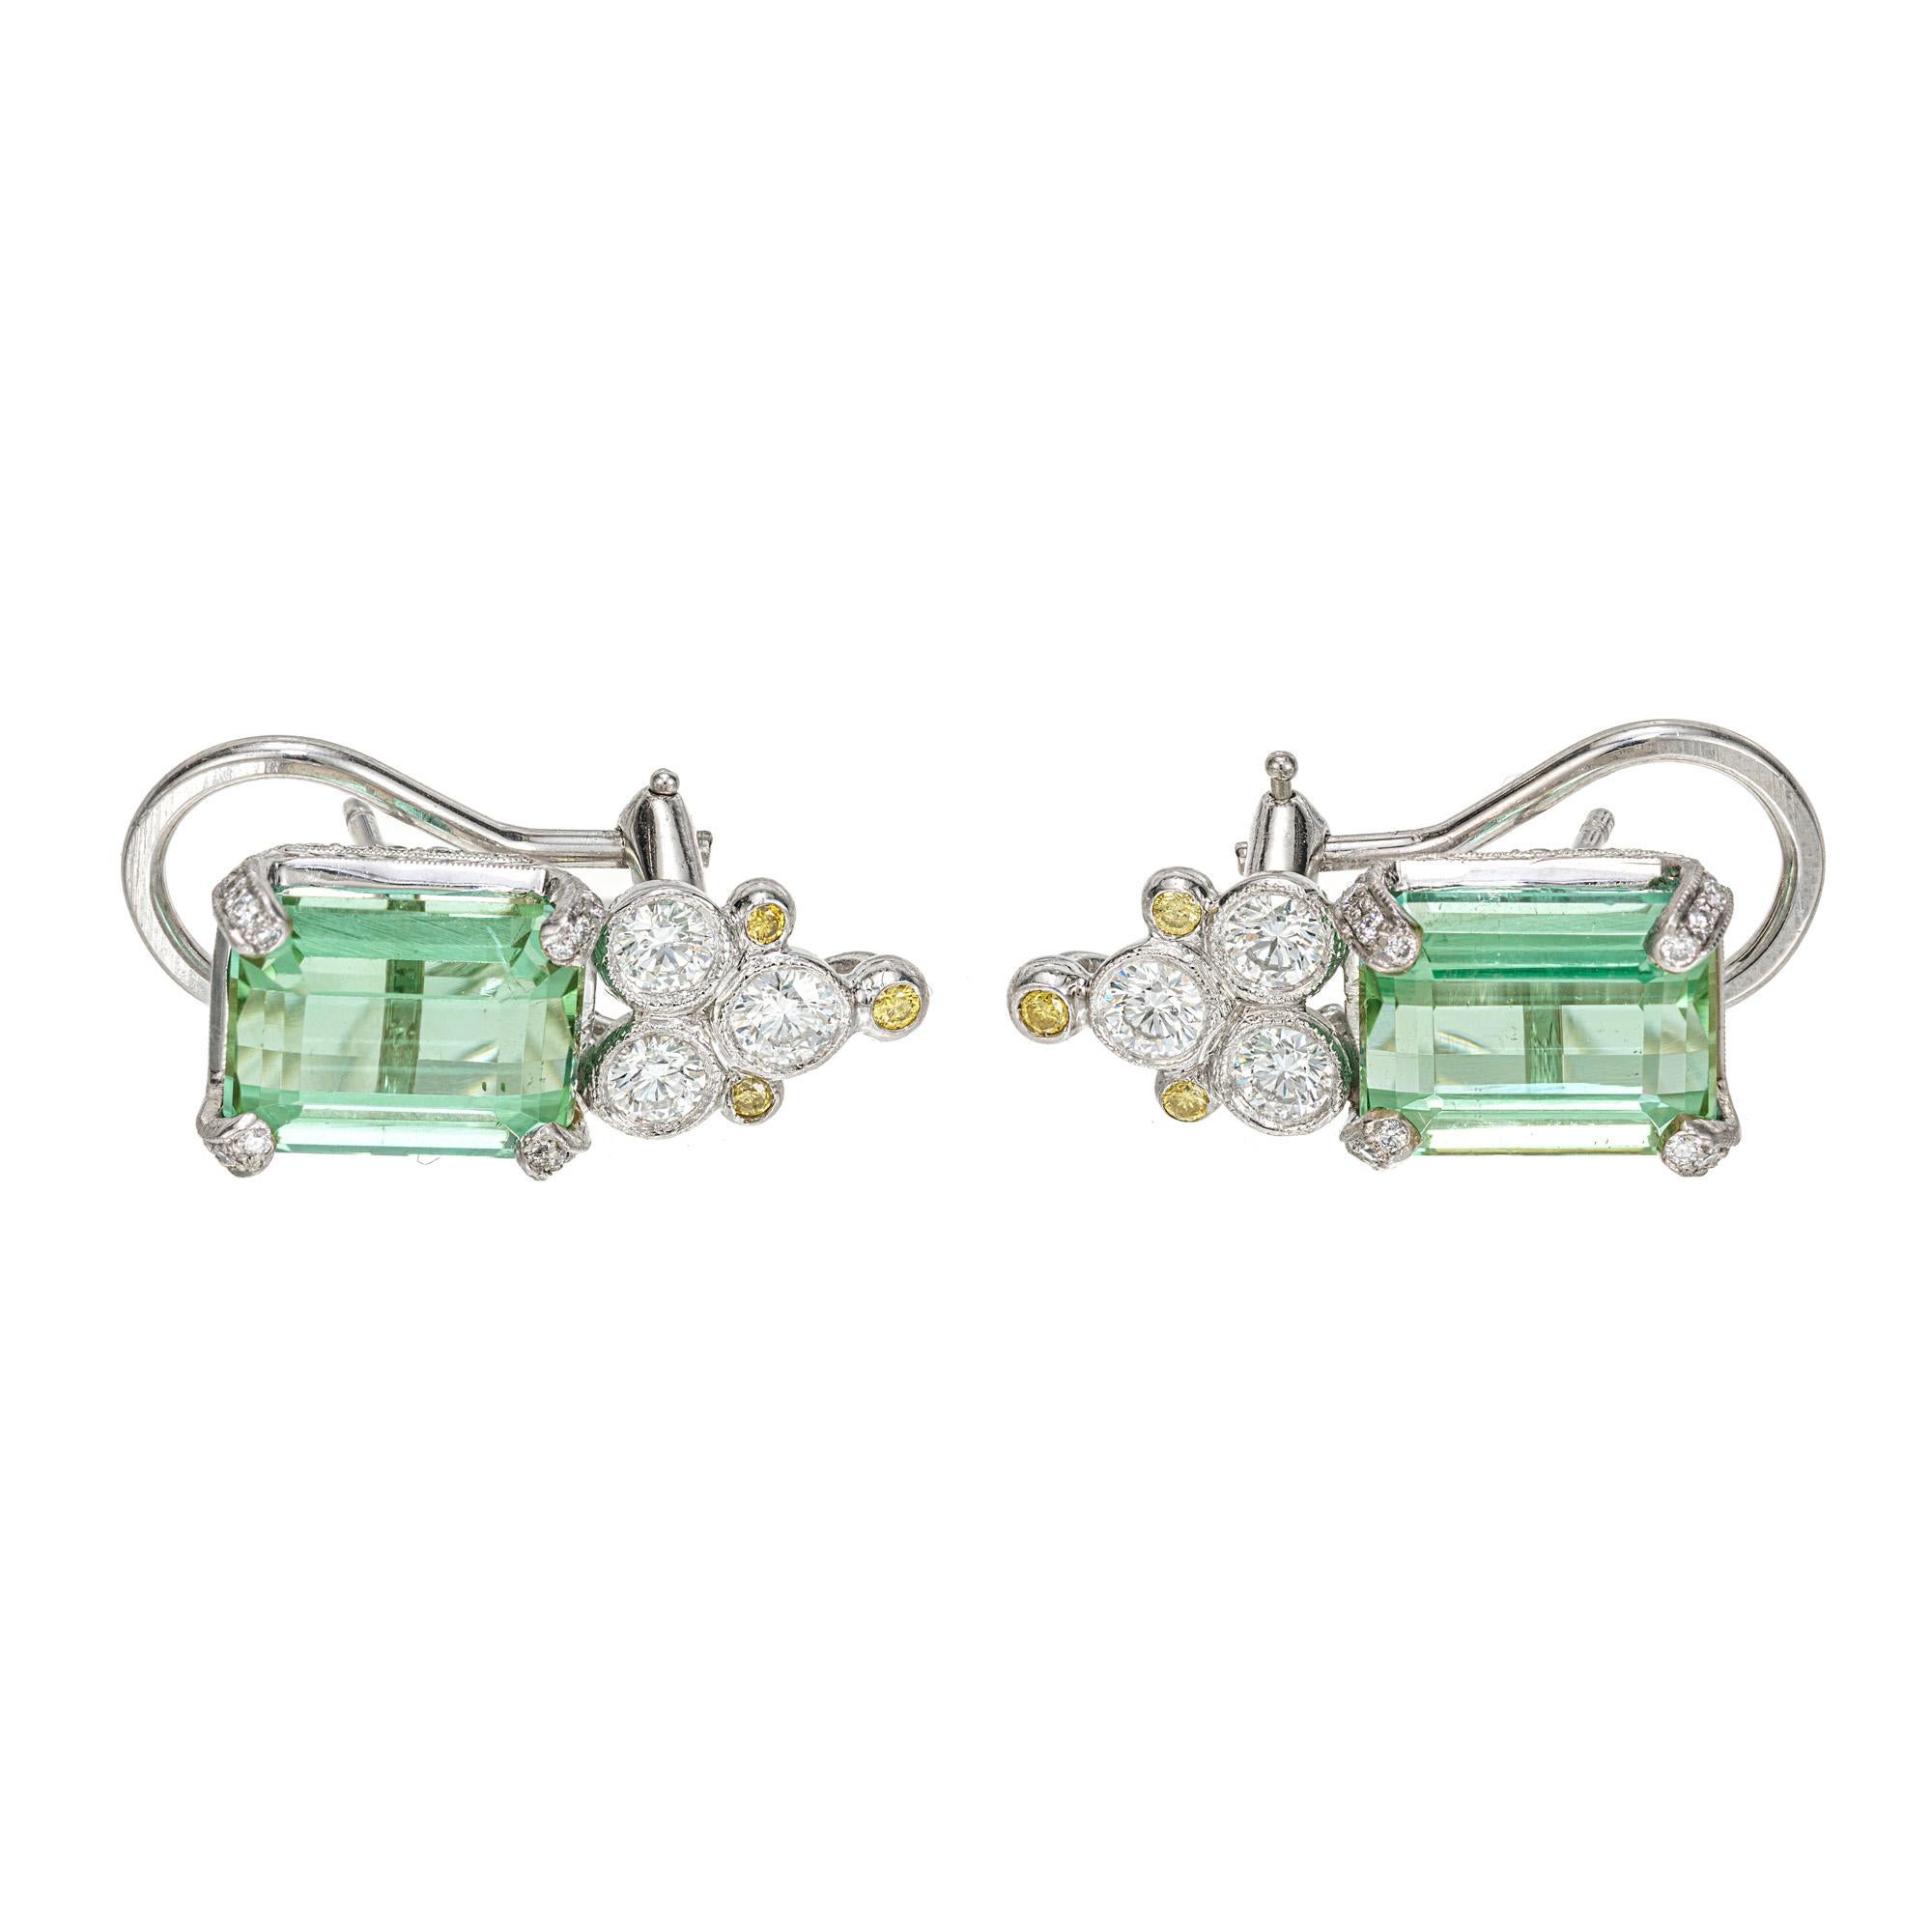 Art Deco handmade Platinum micro pave diamond and green tourmaline clip post earrings. 2 green emerald cut tourmalines set in platinum baskets with 96 round accent diamonds, 6 fancy yellow and white bezel set accent diamonds. GIA Certified bluish